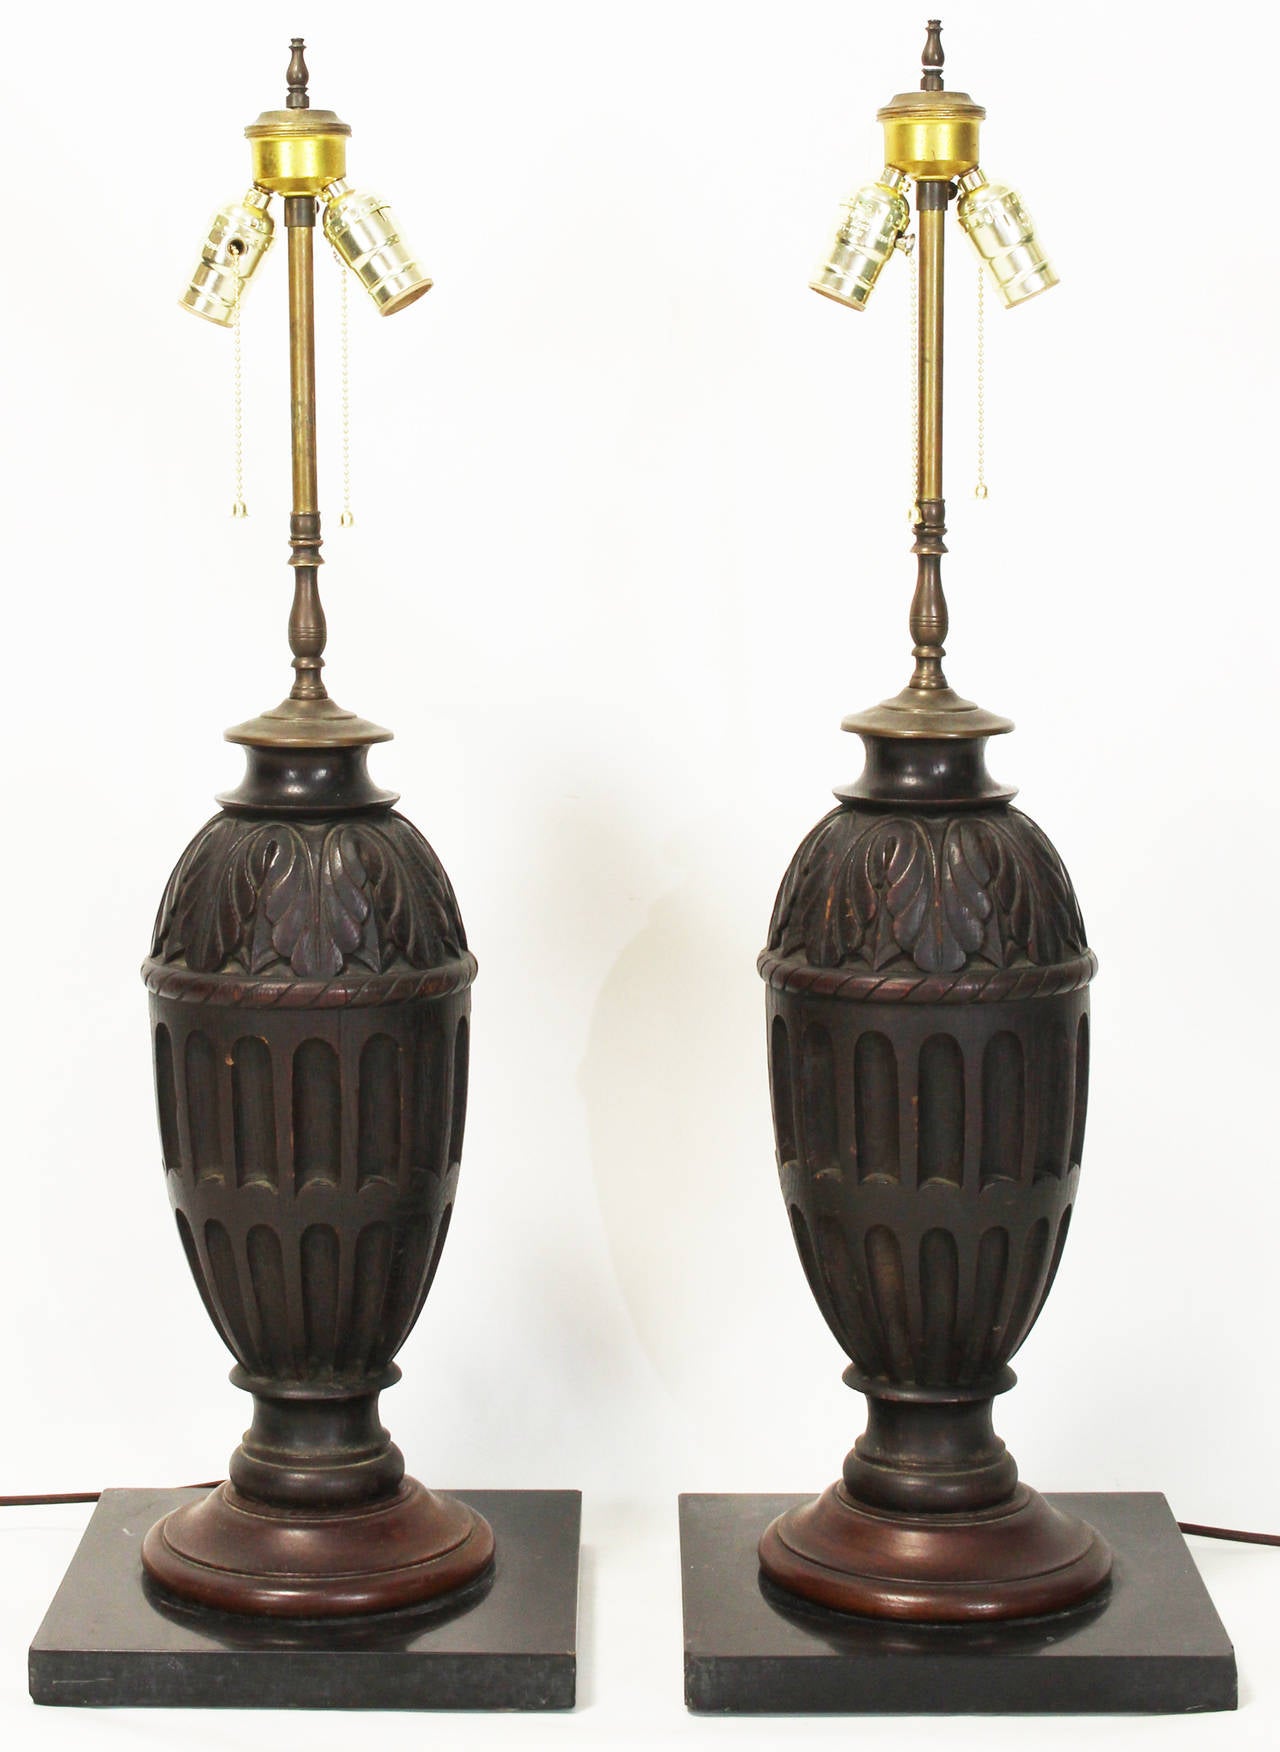 A pair of large carved wood table lamps on marble bases dating from the 1930s.